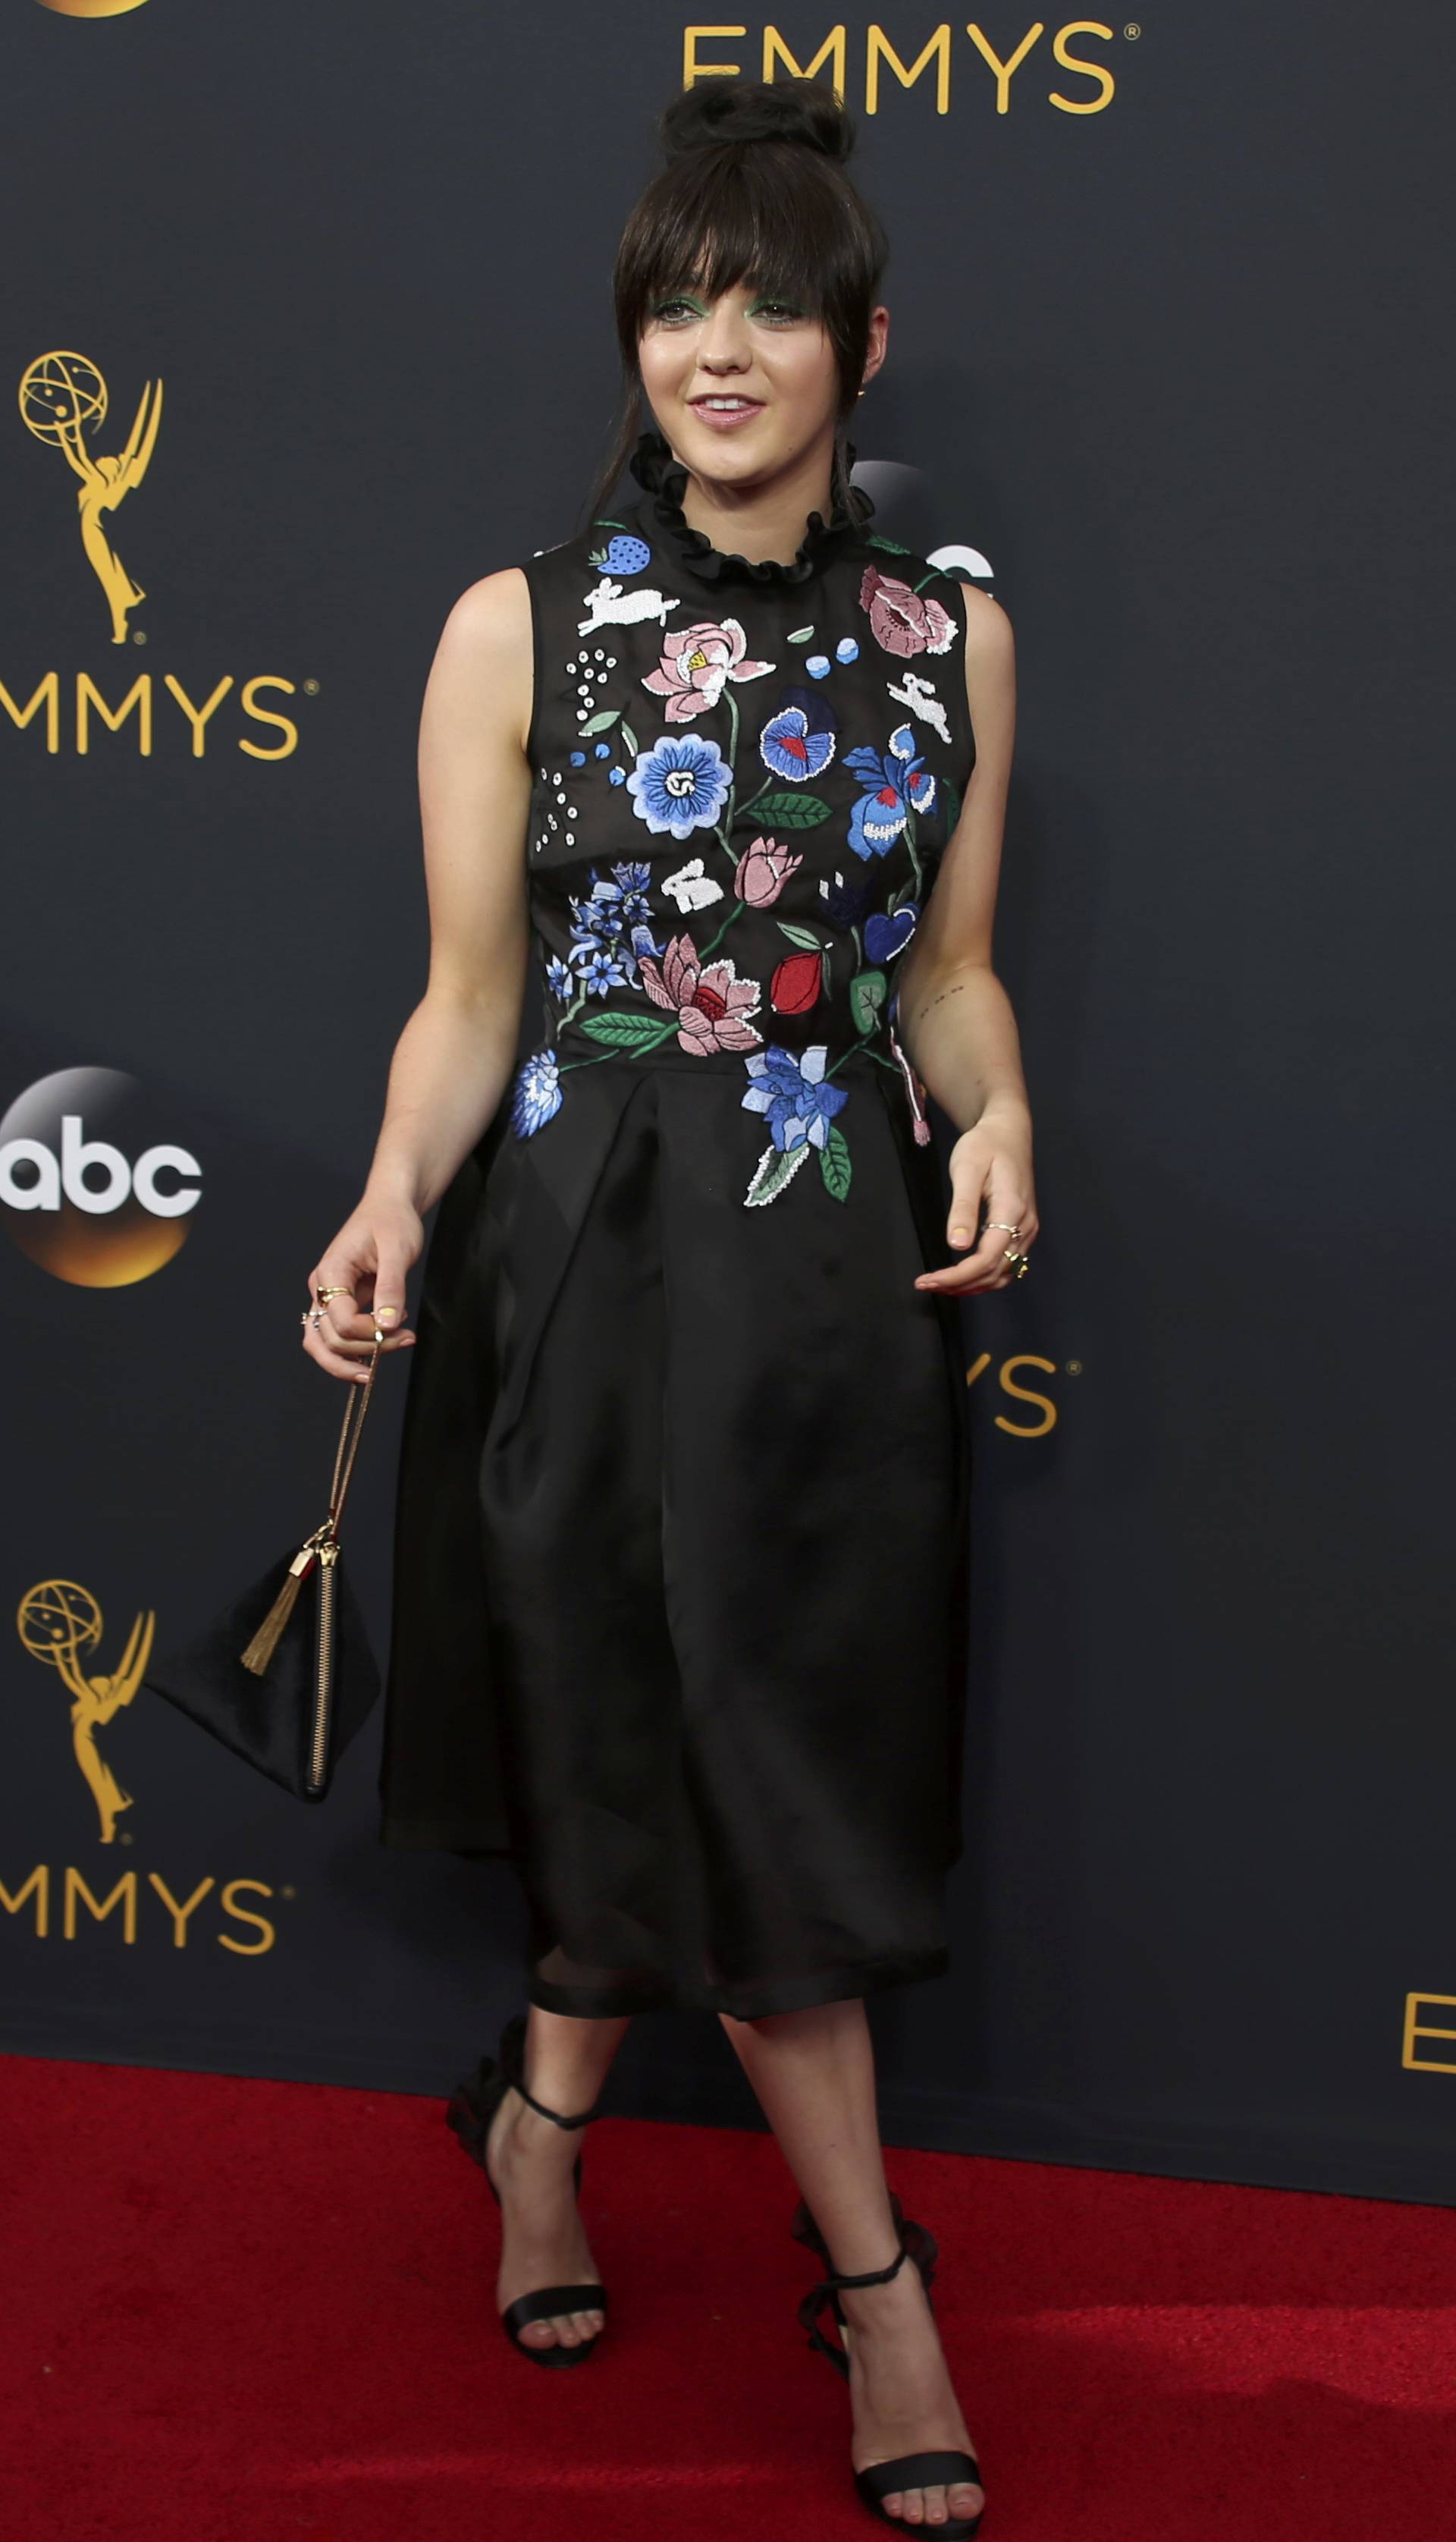 Actress Maisie WIlliams arrives at the 68th Primetime Emmy Awards in Los Angeles, California